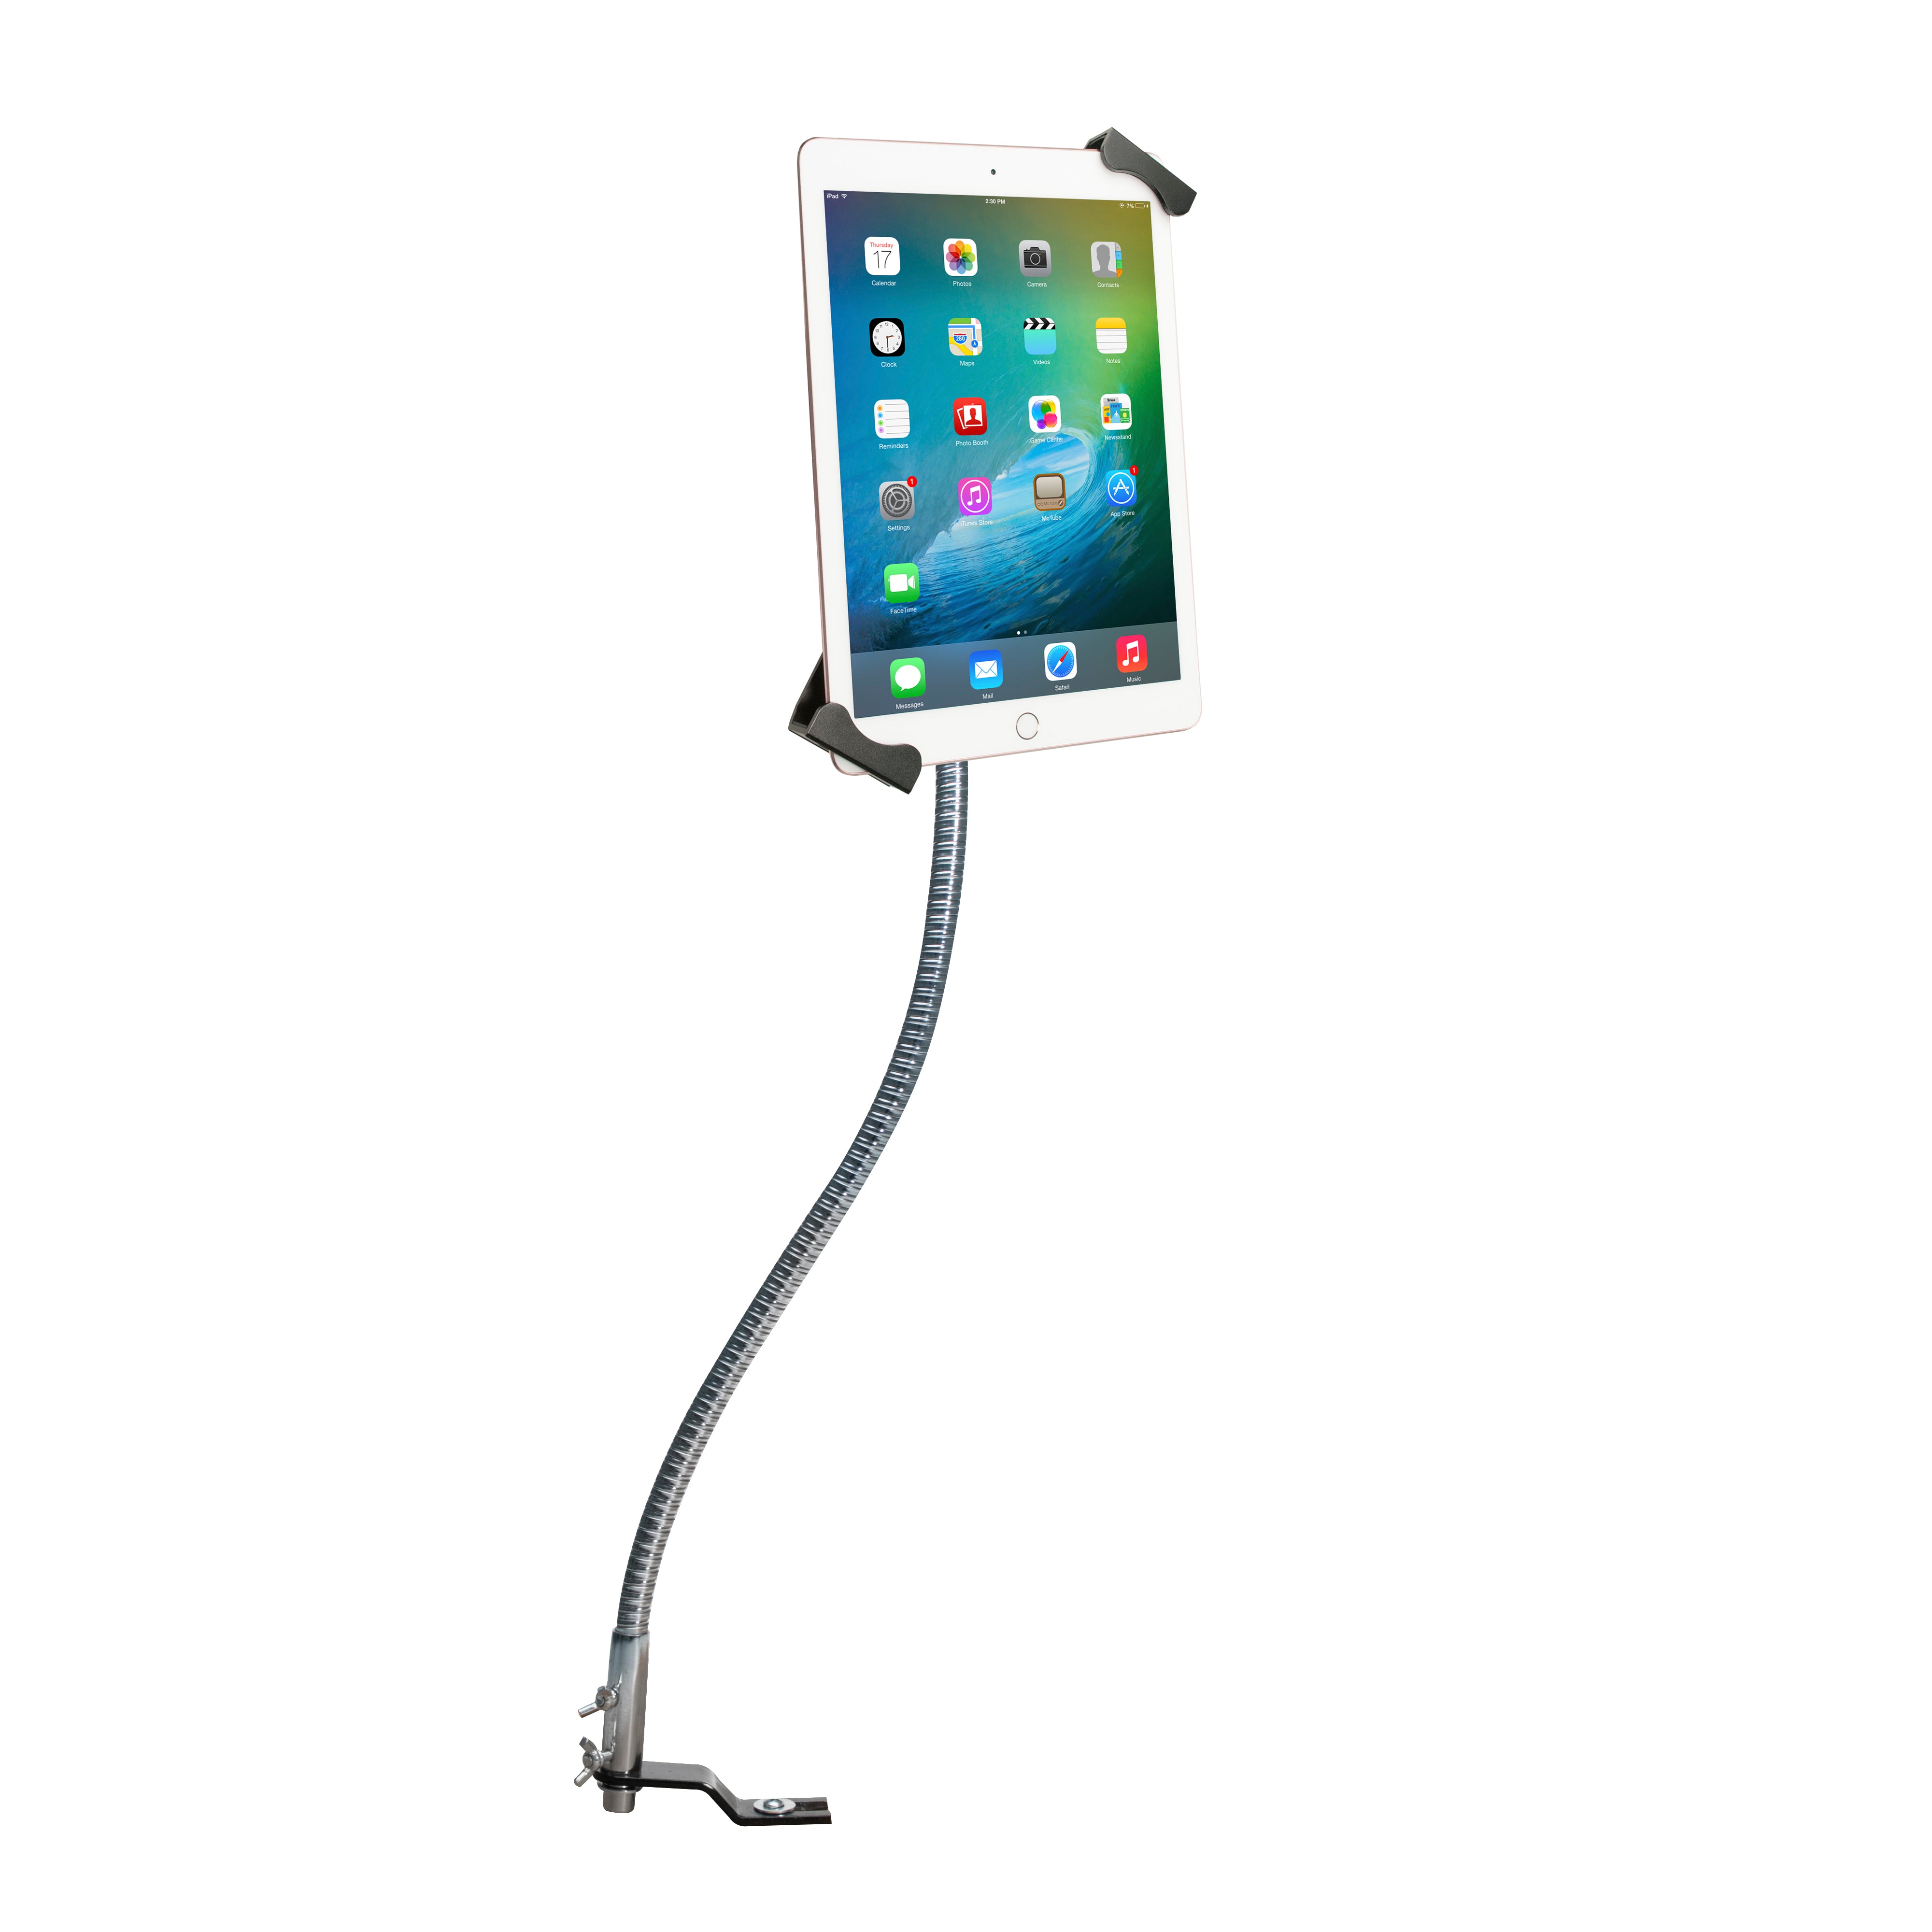 Security Gooseneck Car Mount for 7-14 Inch Tablets, including iPad 10.2-inch (7th/ 8th/ 9th Generation)